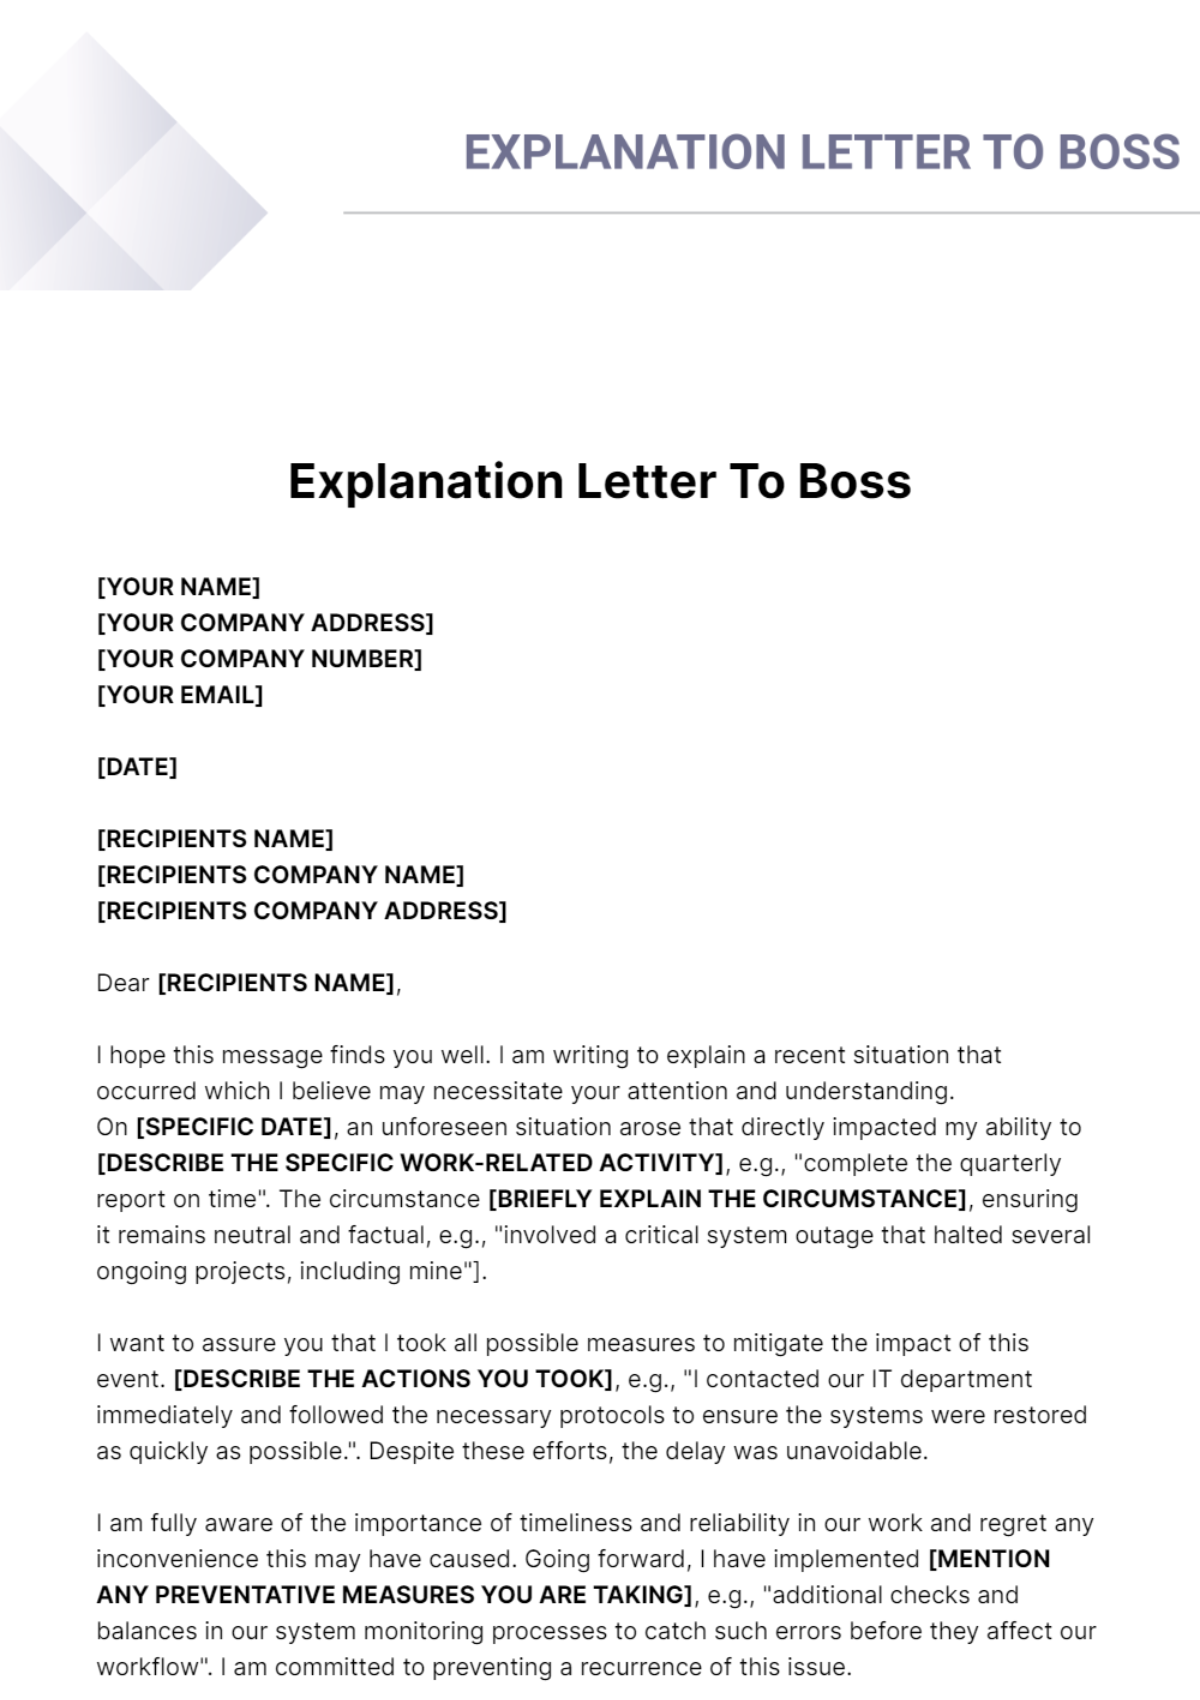 Explanation Letter To Boss Template